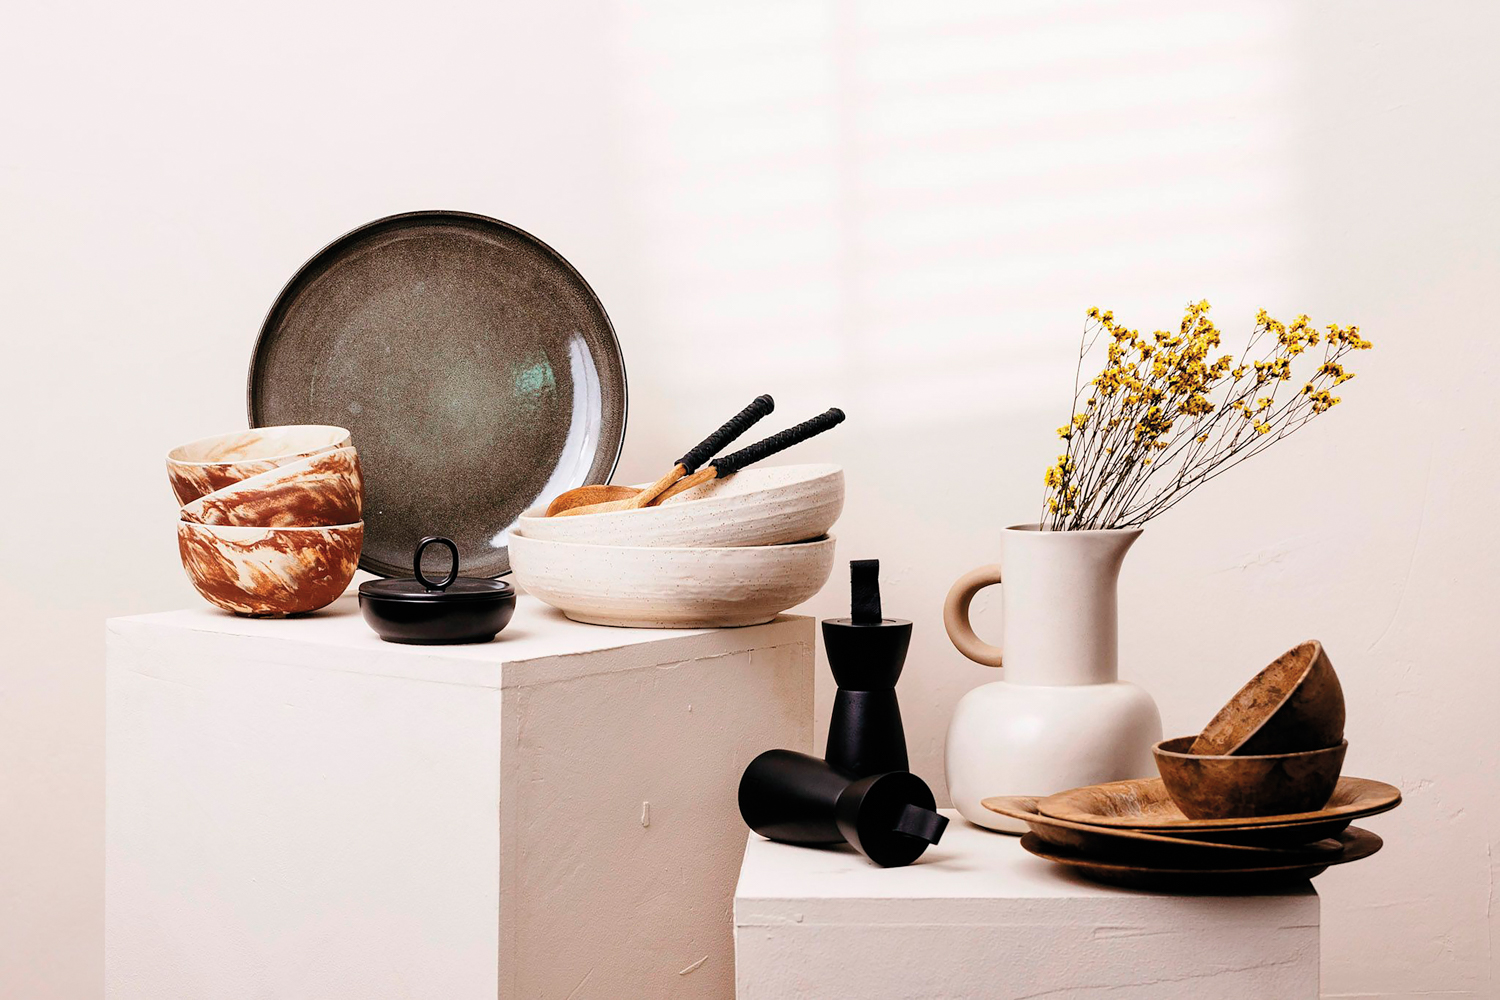 Black and cream-colored ceramic dishware and wood bowls on white plinths by Kameran Schaffner